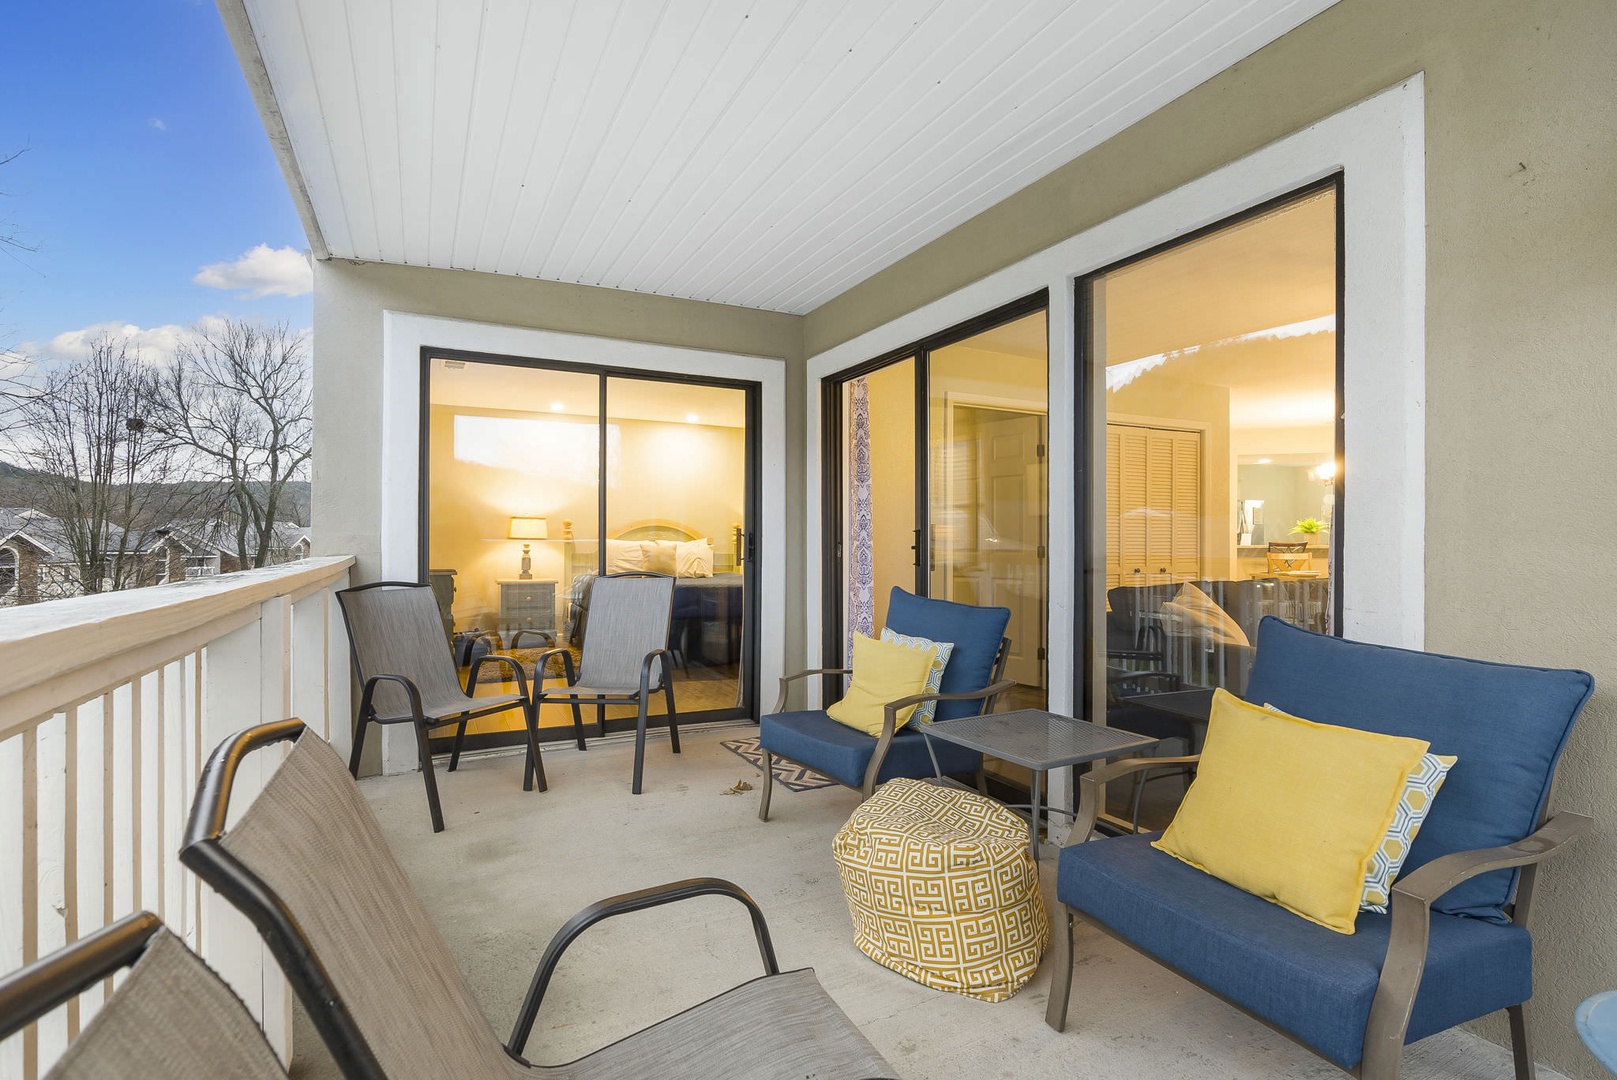 Veranda with ample seating for family and friends